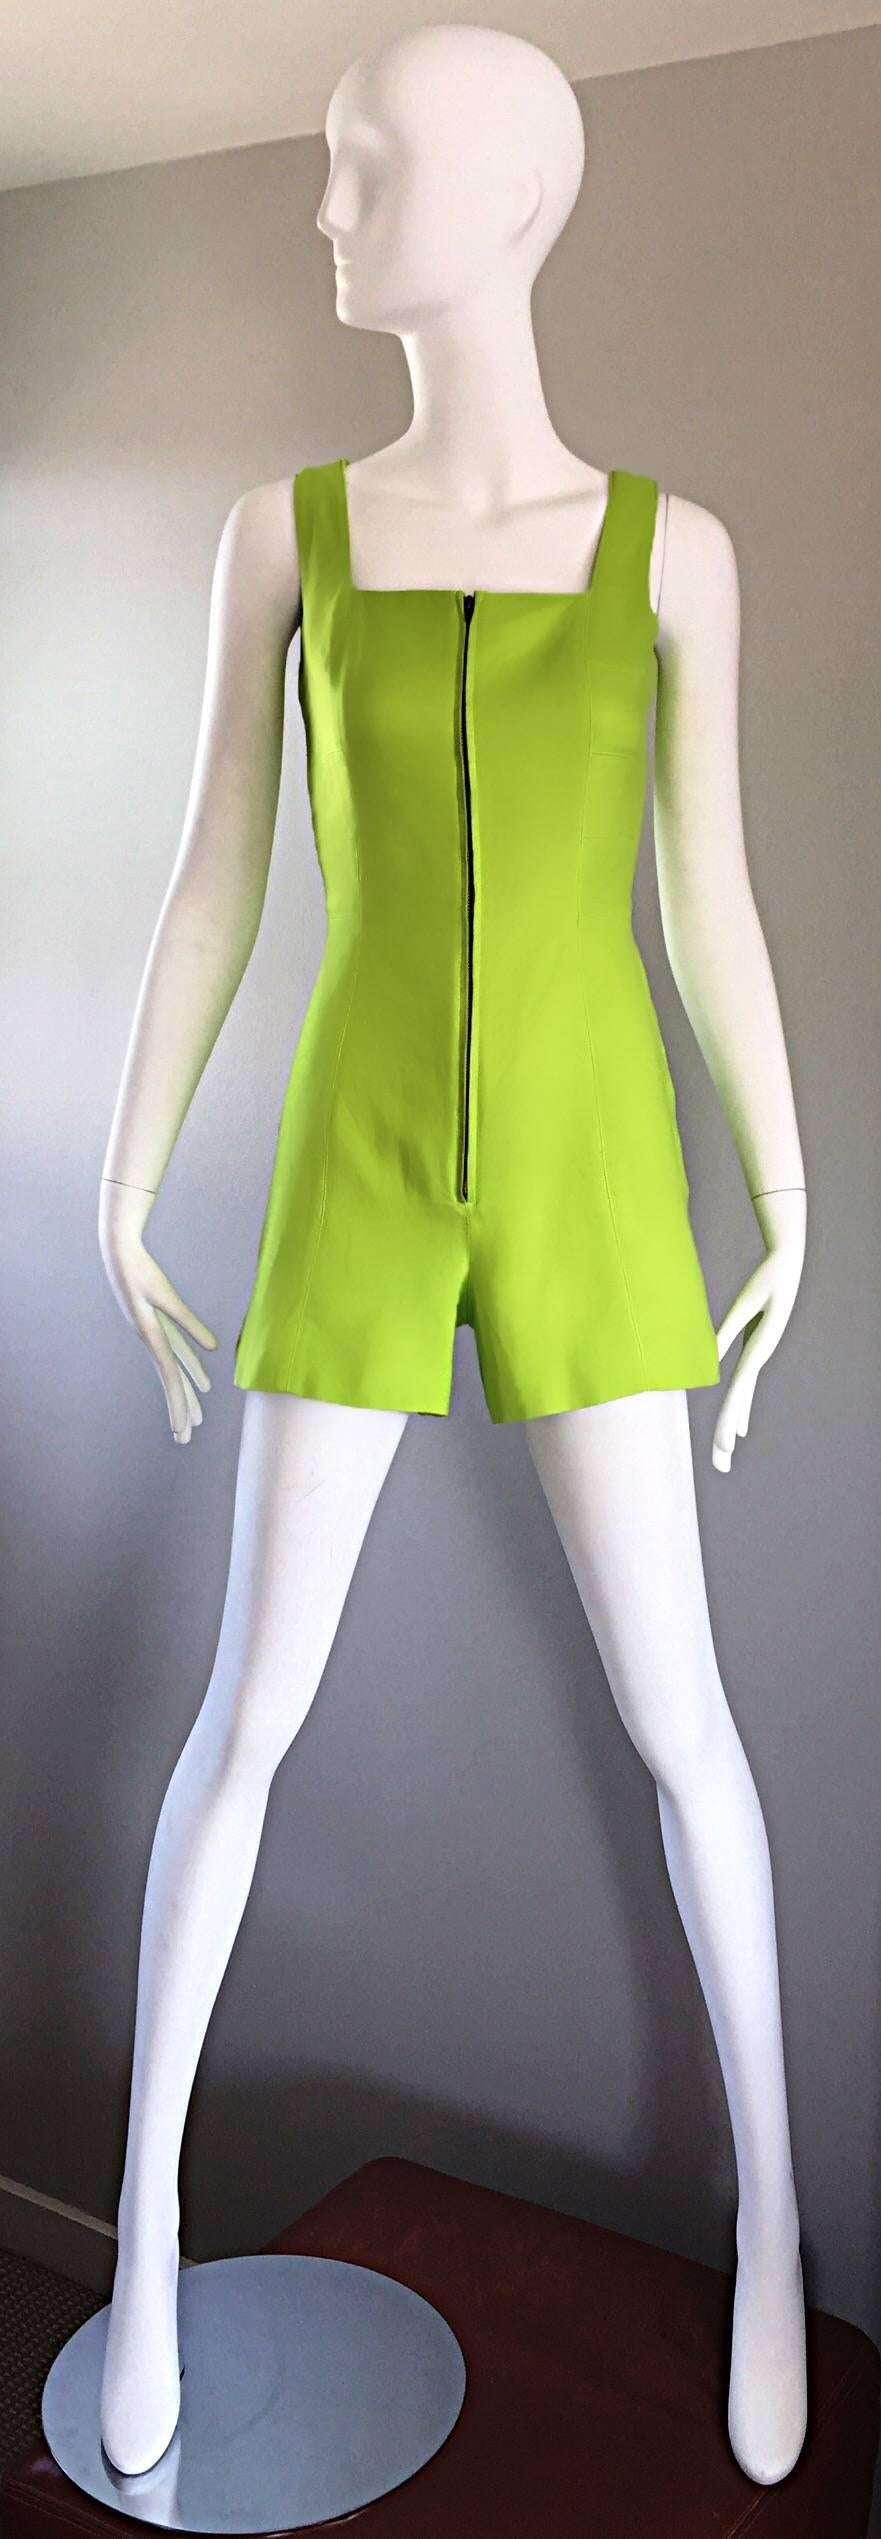 Extraordinary and super rare chic vintage CLAUDE MONTANA early 1990s / 90s one piece romper / playsuit / jumpsuit! Electric neon lime green color on a soft cotton and linen blend. Full metal zipper up the front bodice. Super flattering fit that